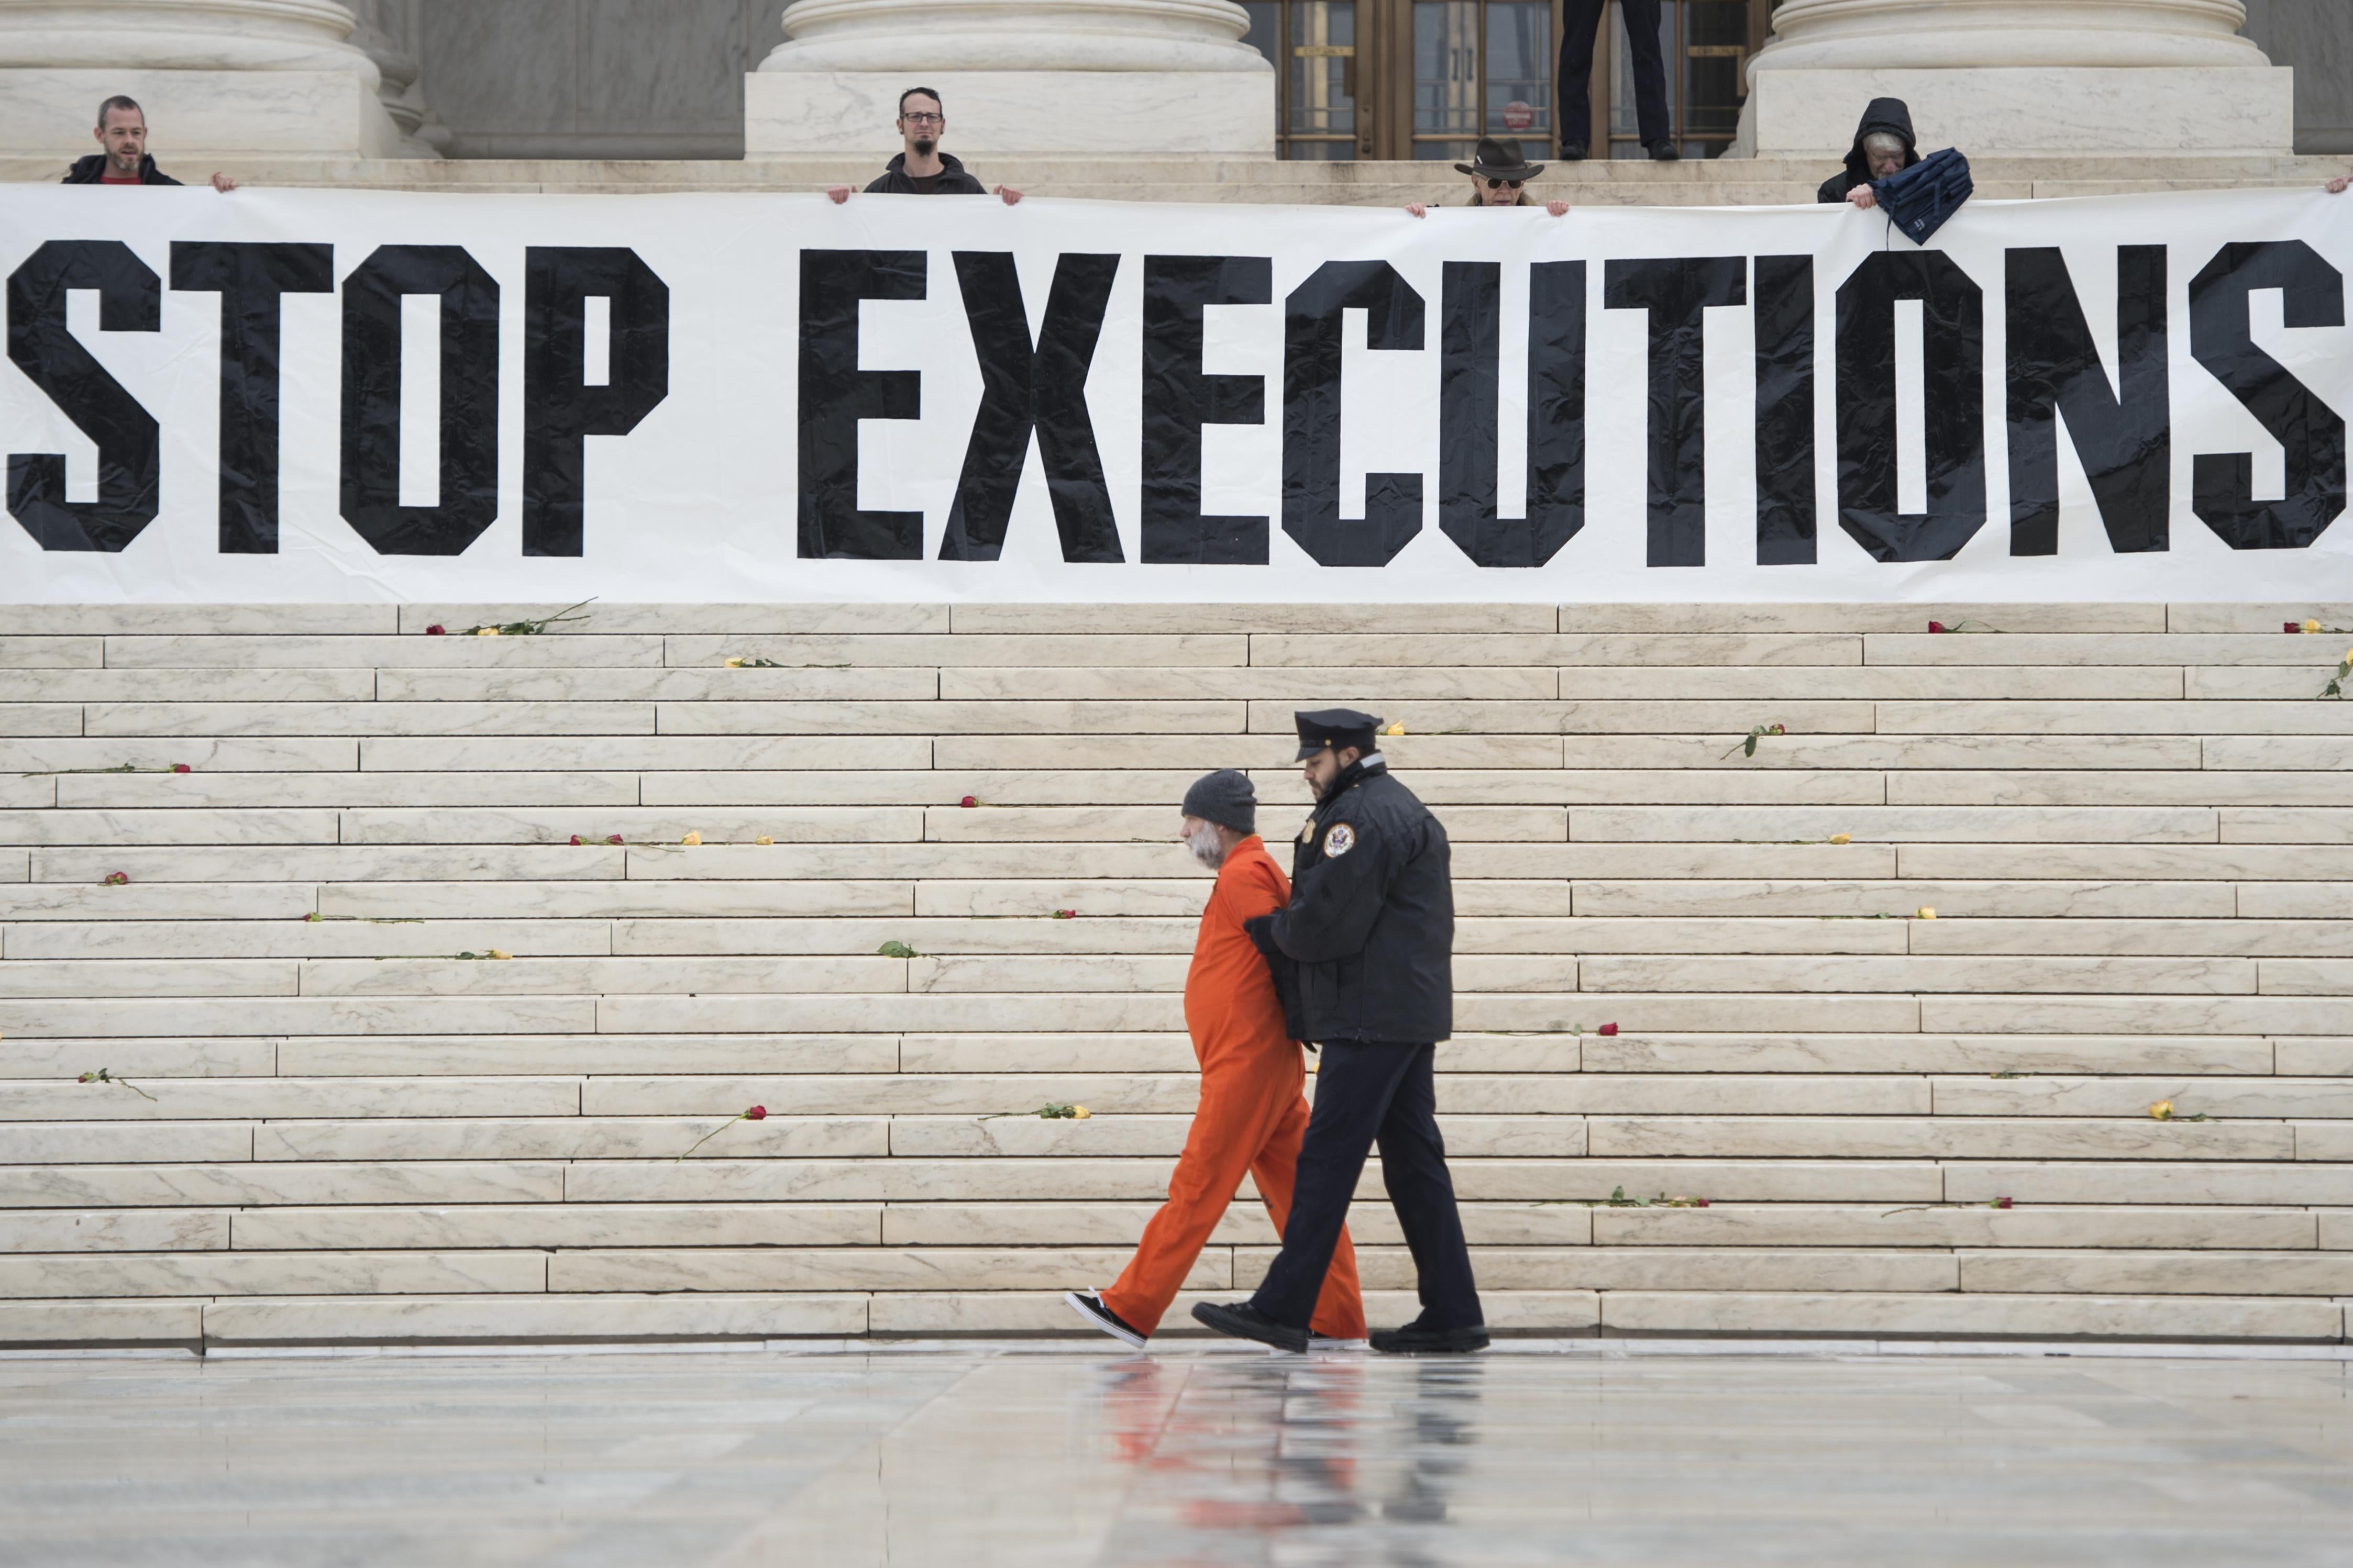 A banner above Gardner reads "STOP EXECUTIONS."